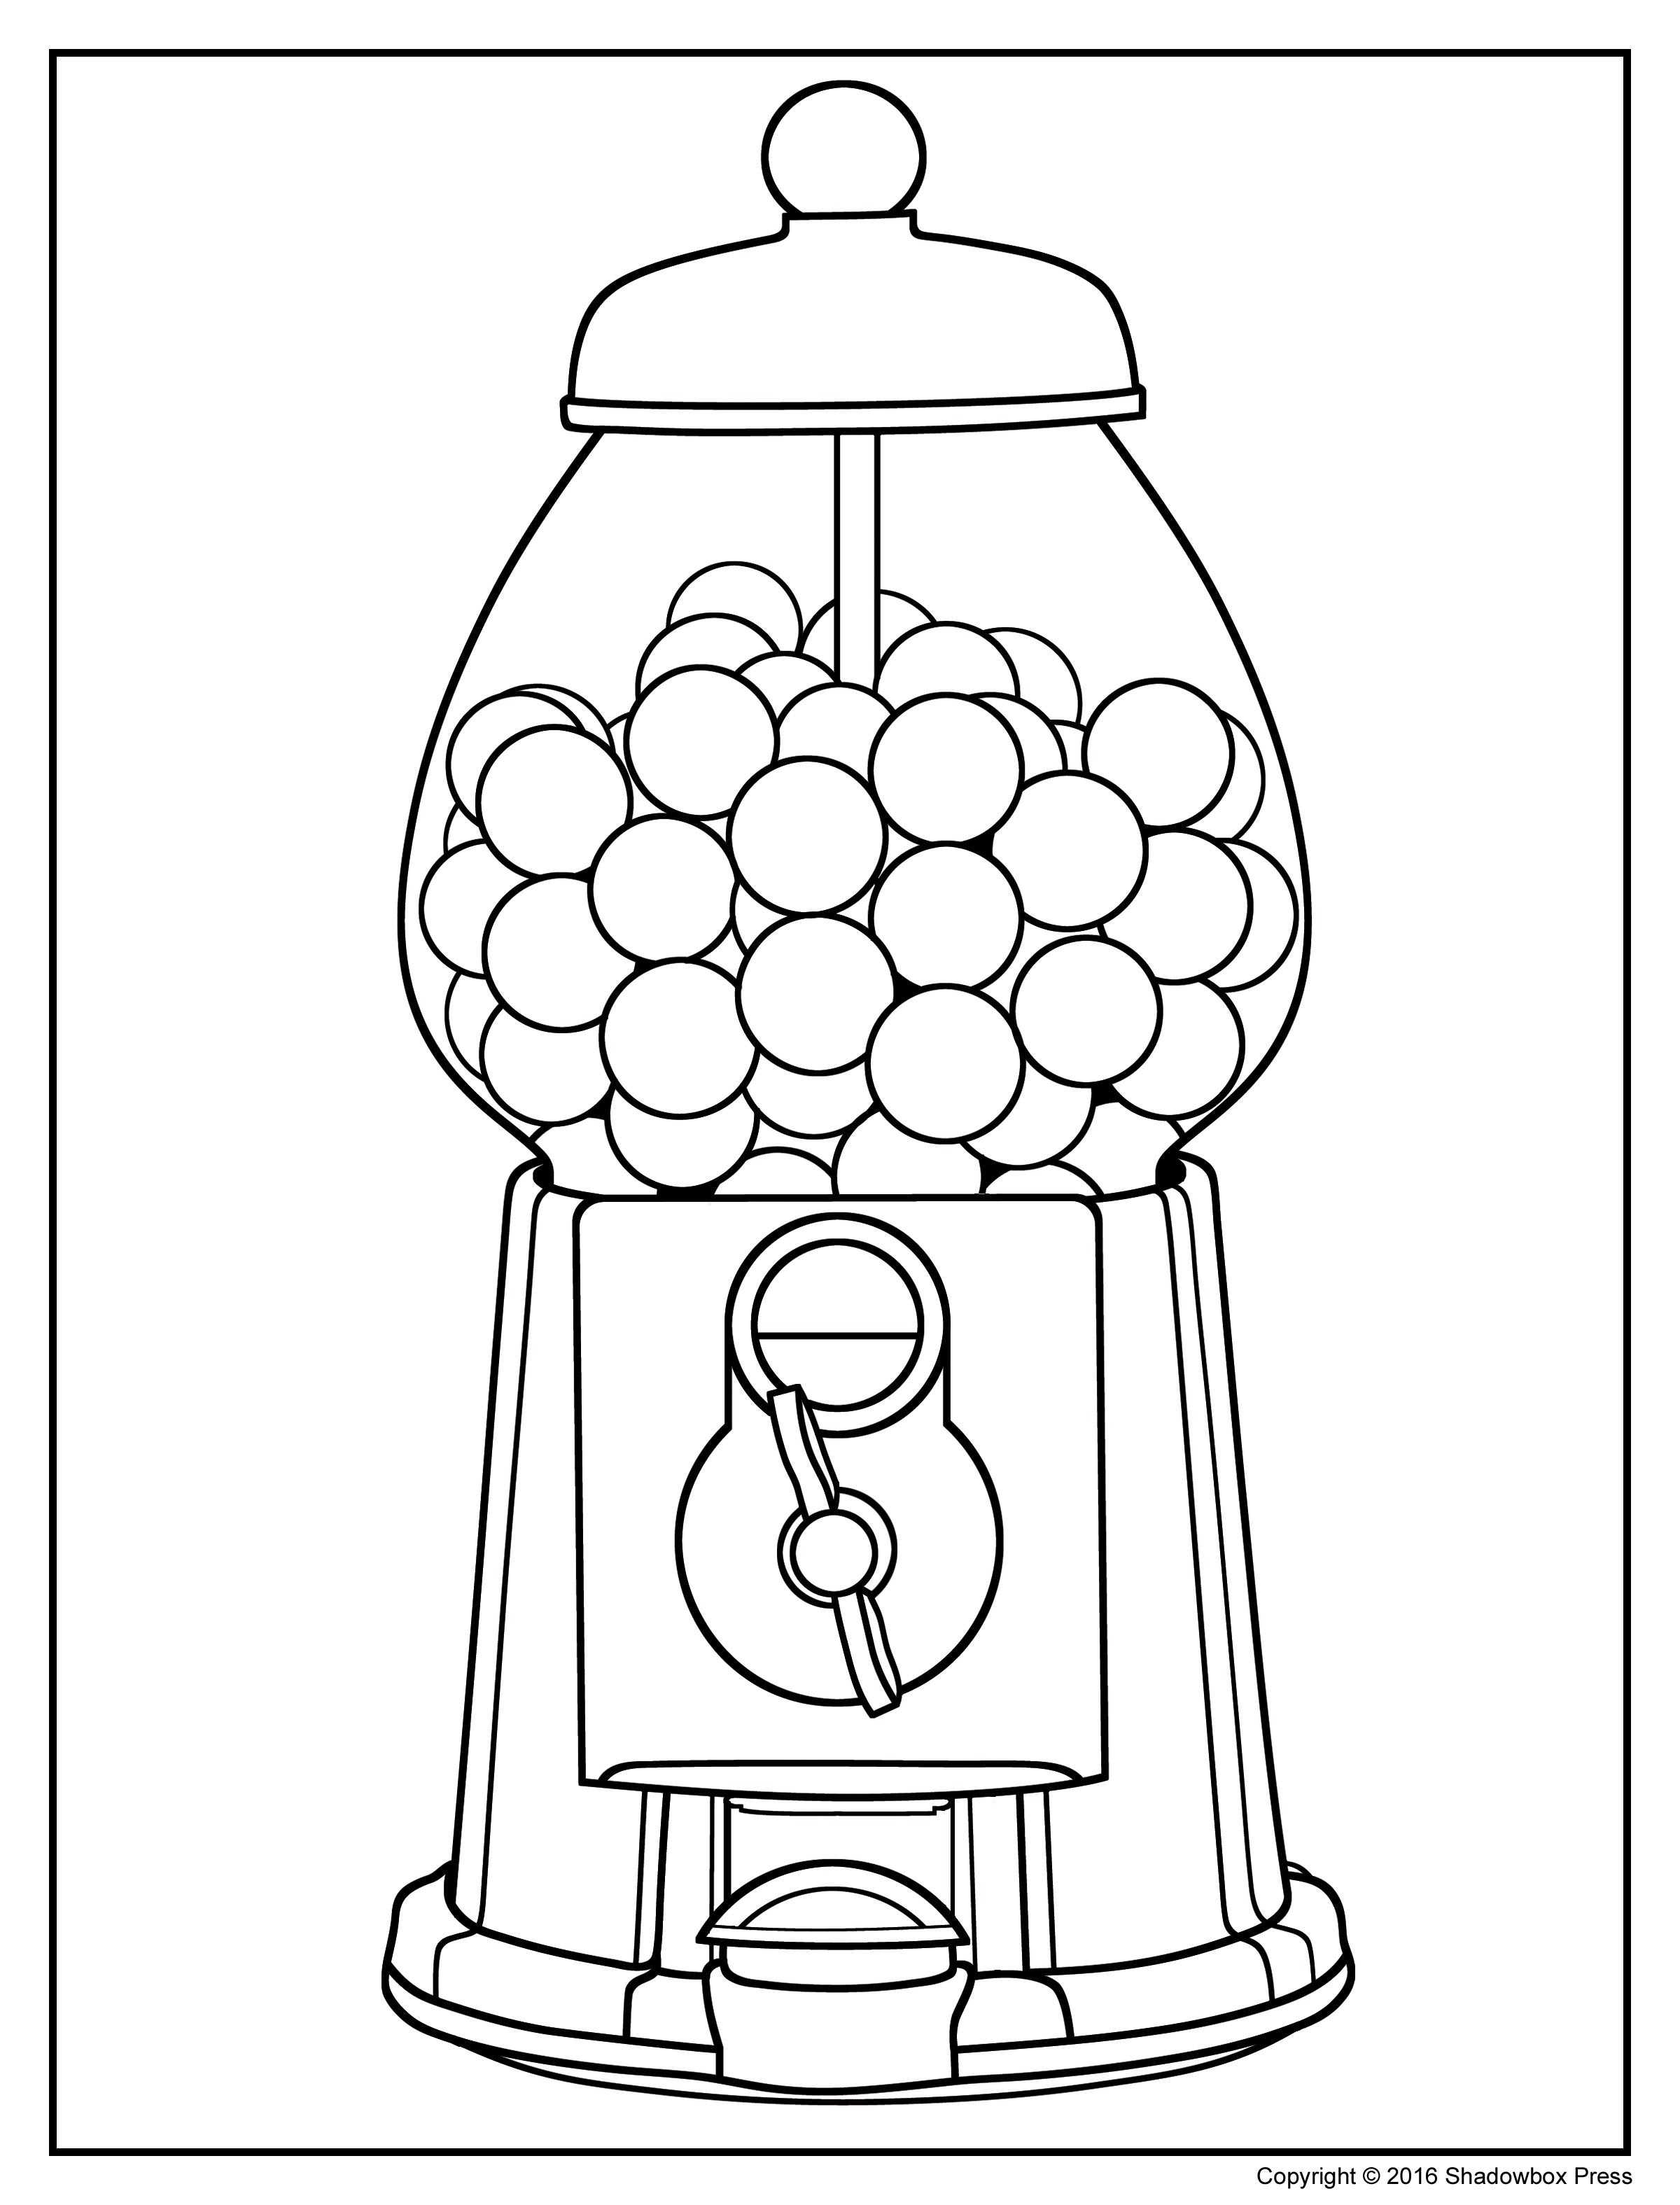 download-269-gumball-machine-coloring-pages-png-pdf-file